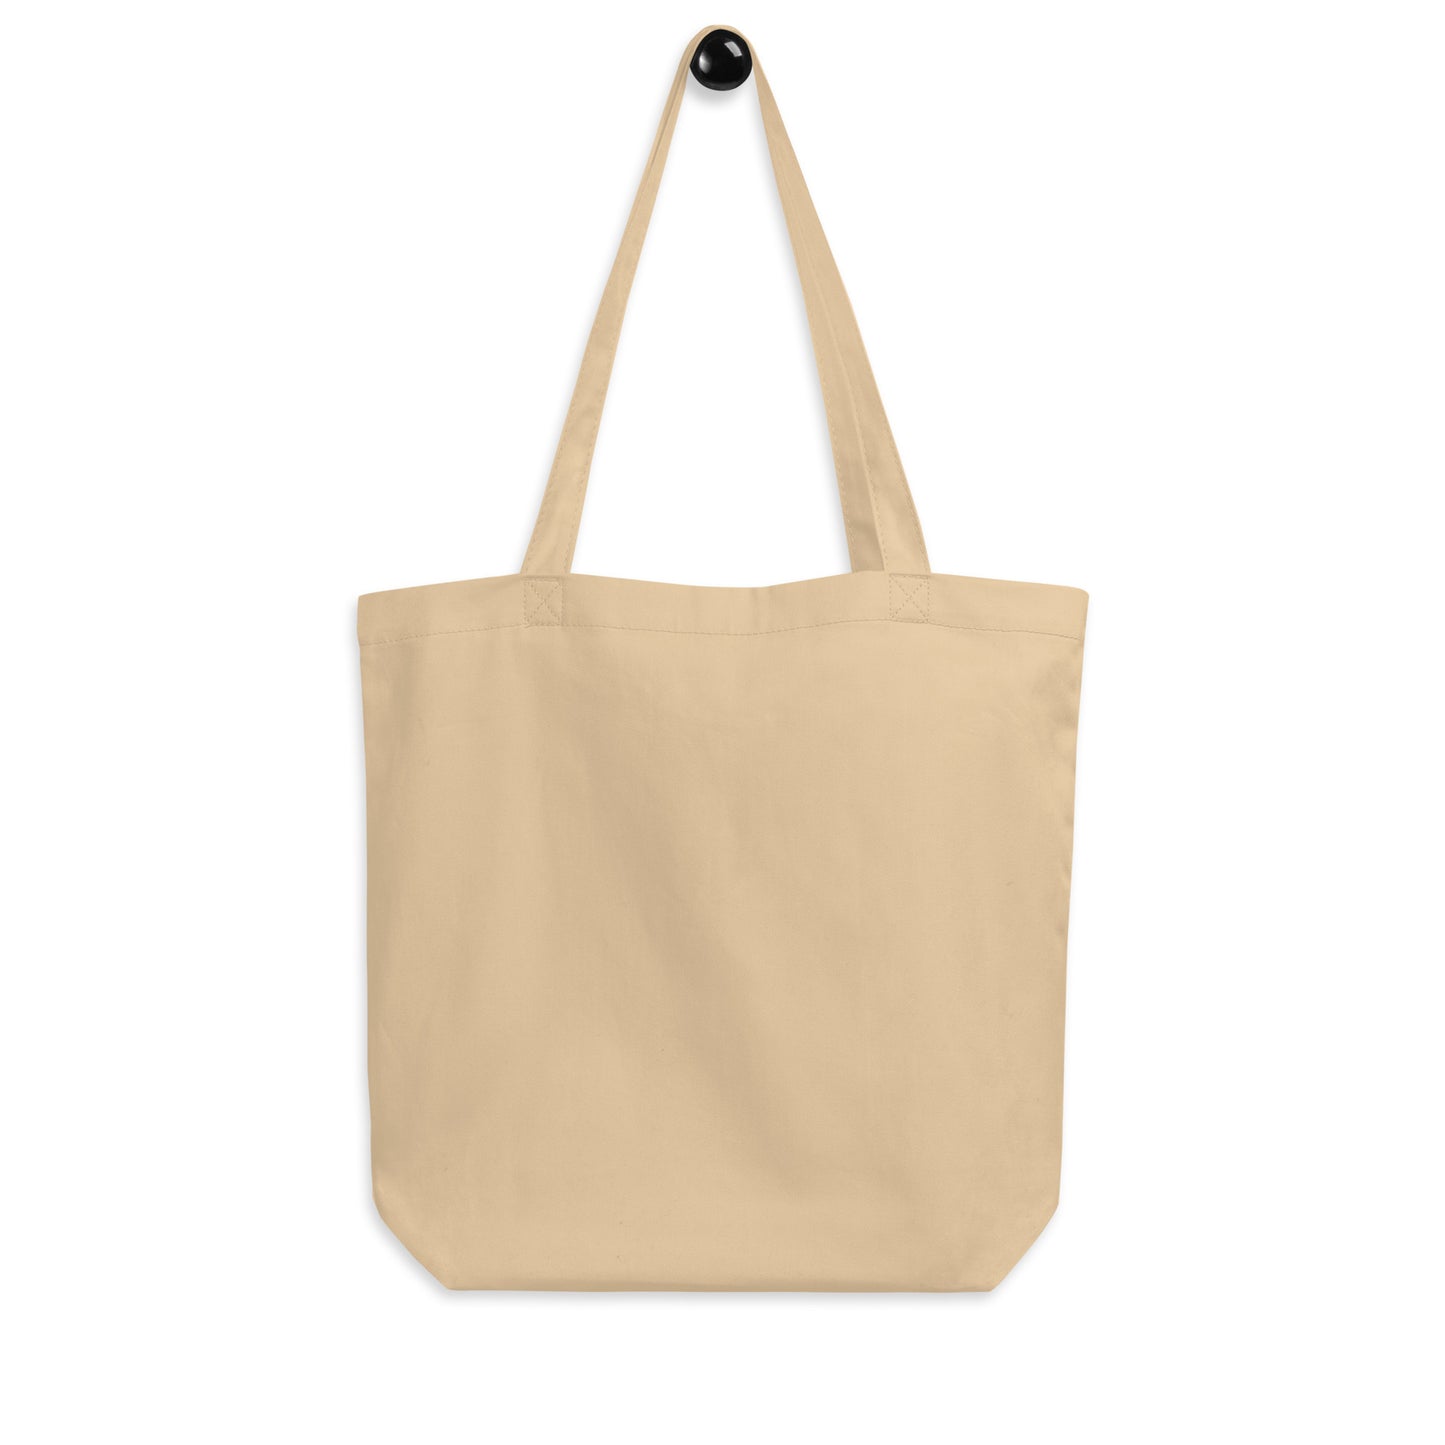 Aviation Gift Organic Tote - Black • ORD Chicago • YHM Designs - Image 05